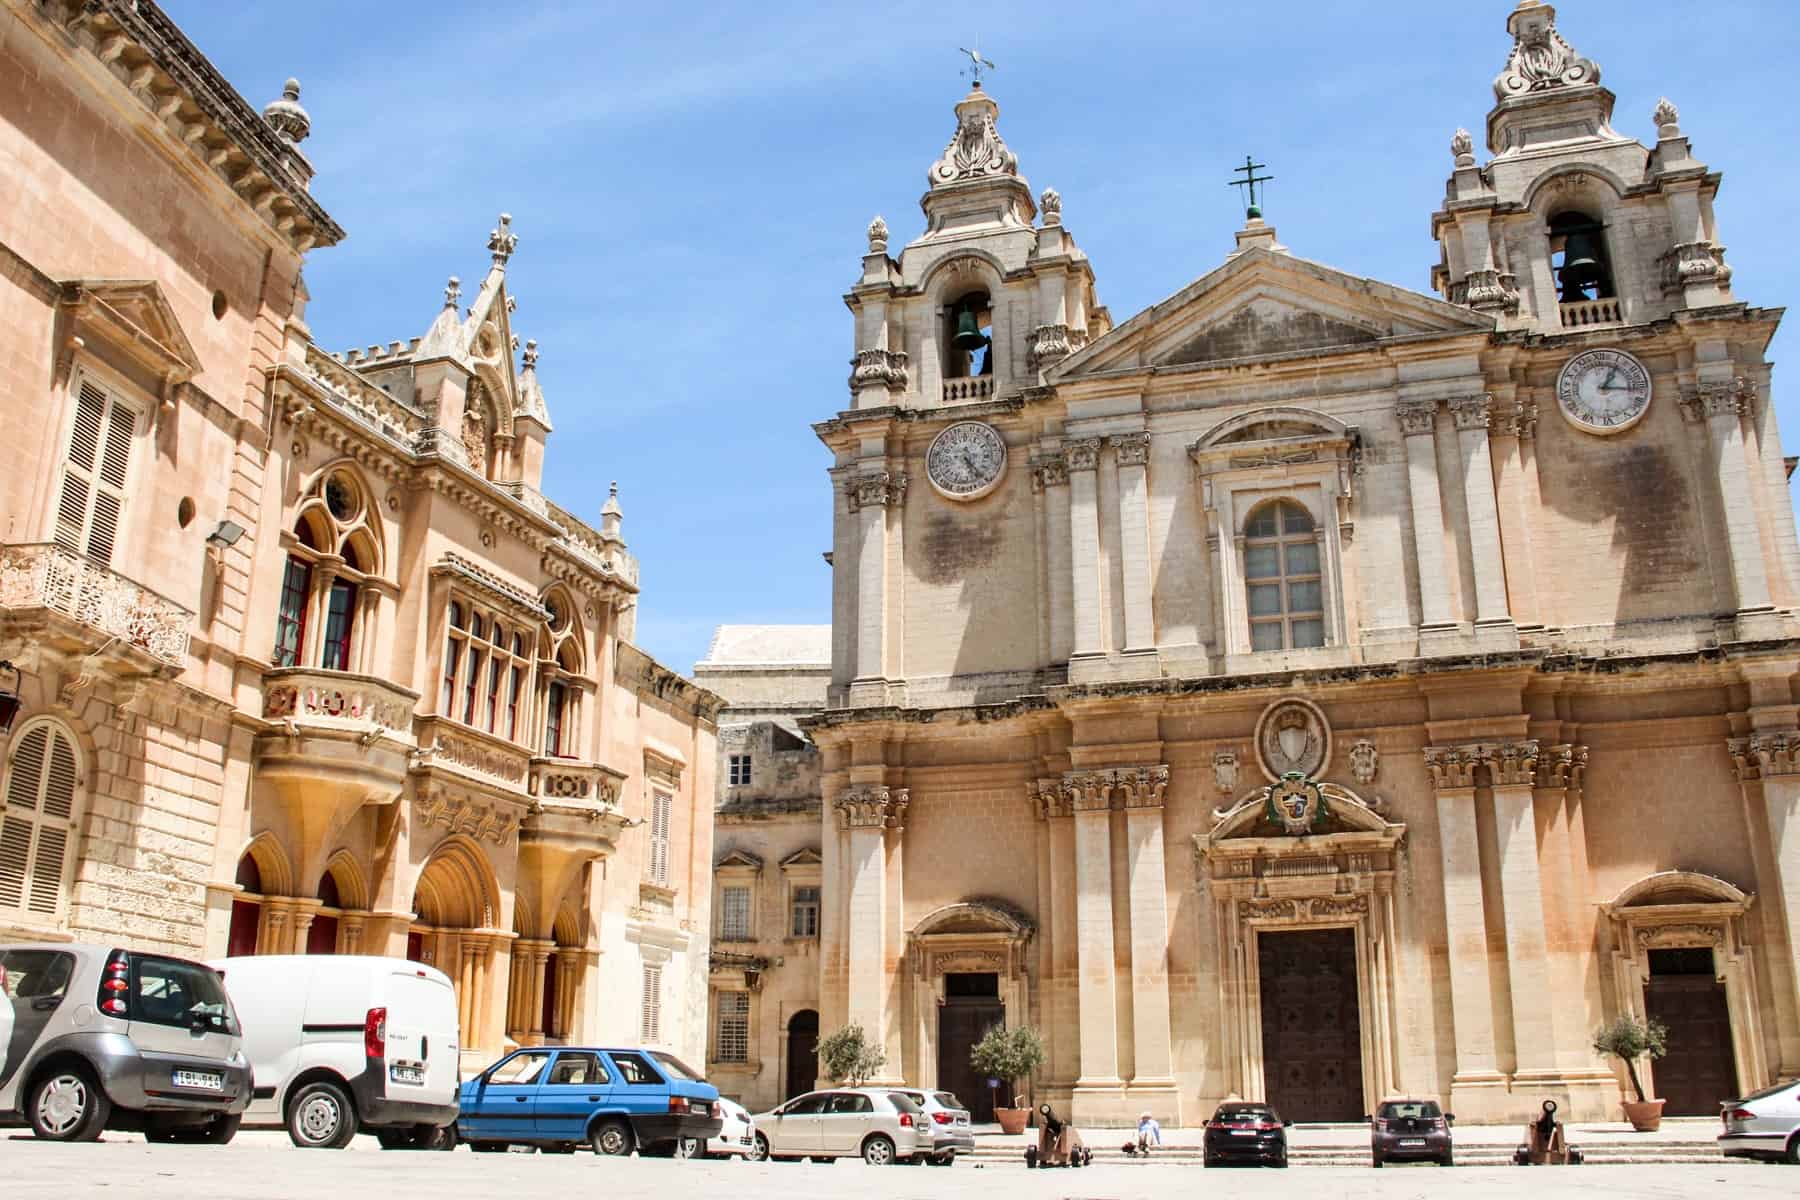 Grey, white and blue cars outside a corner of majestic golden buildings with columns, towers and spires in Mdina, Malta.